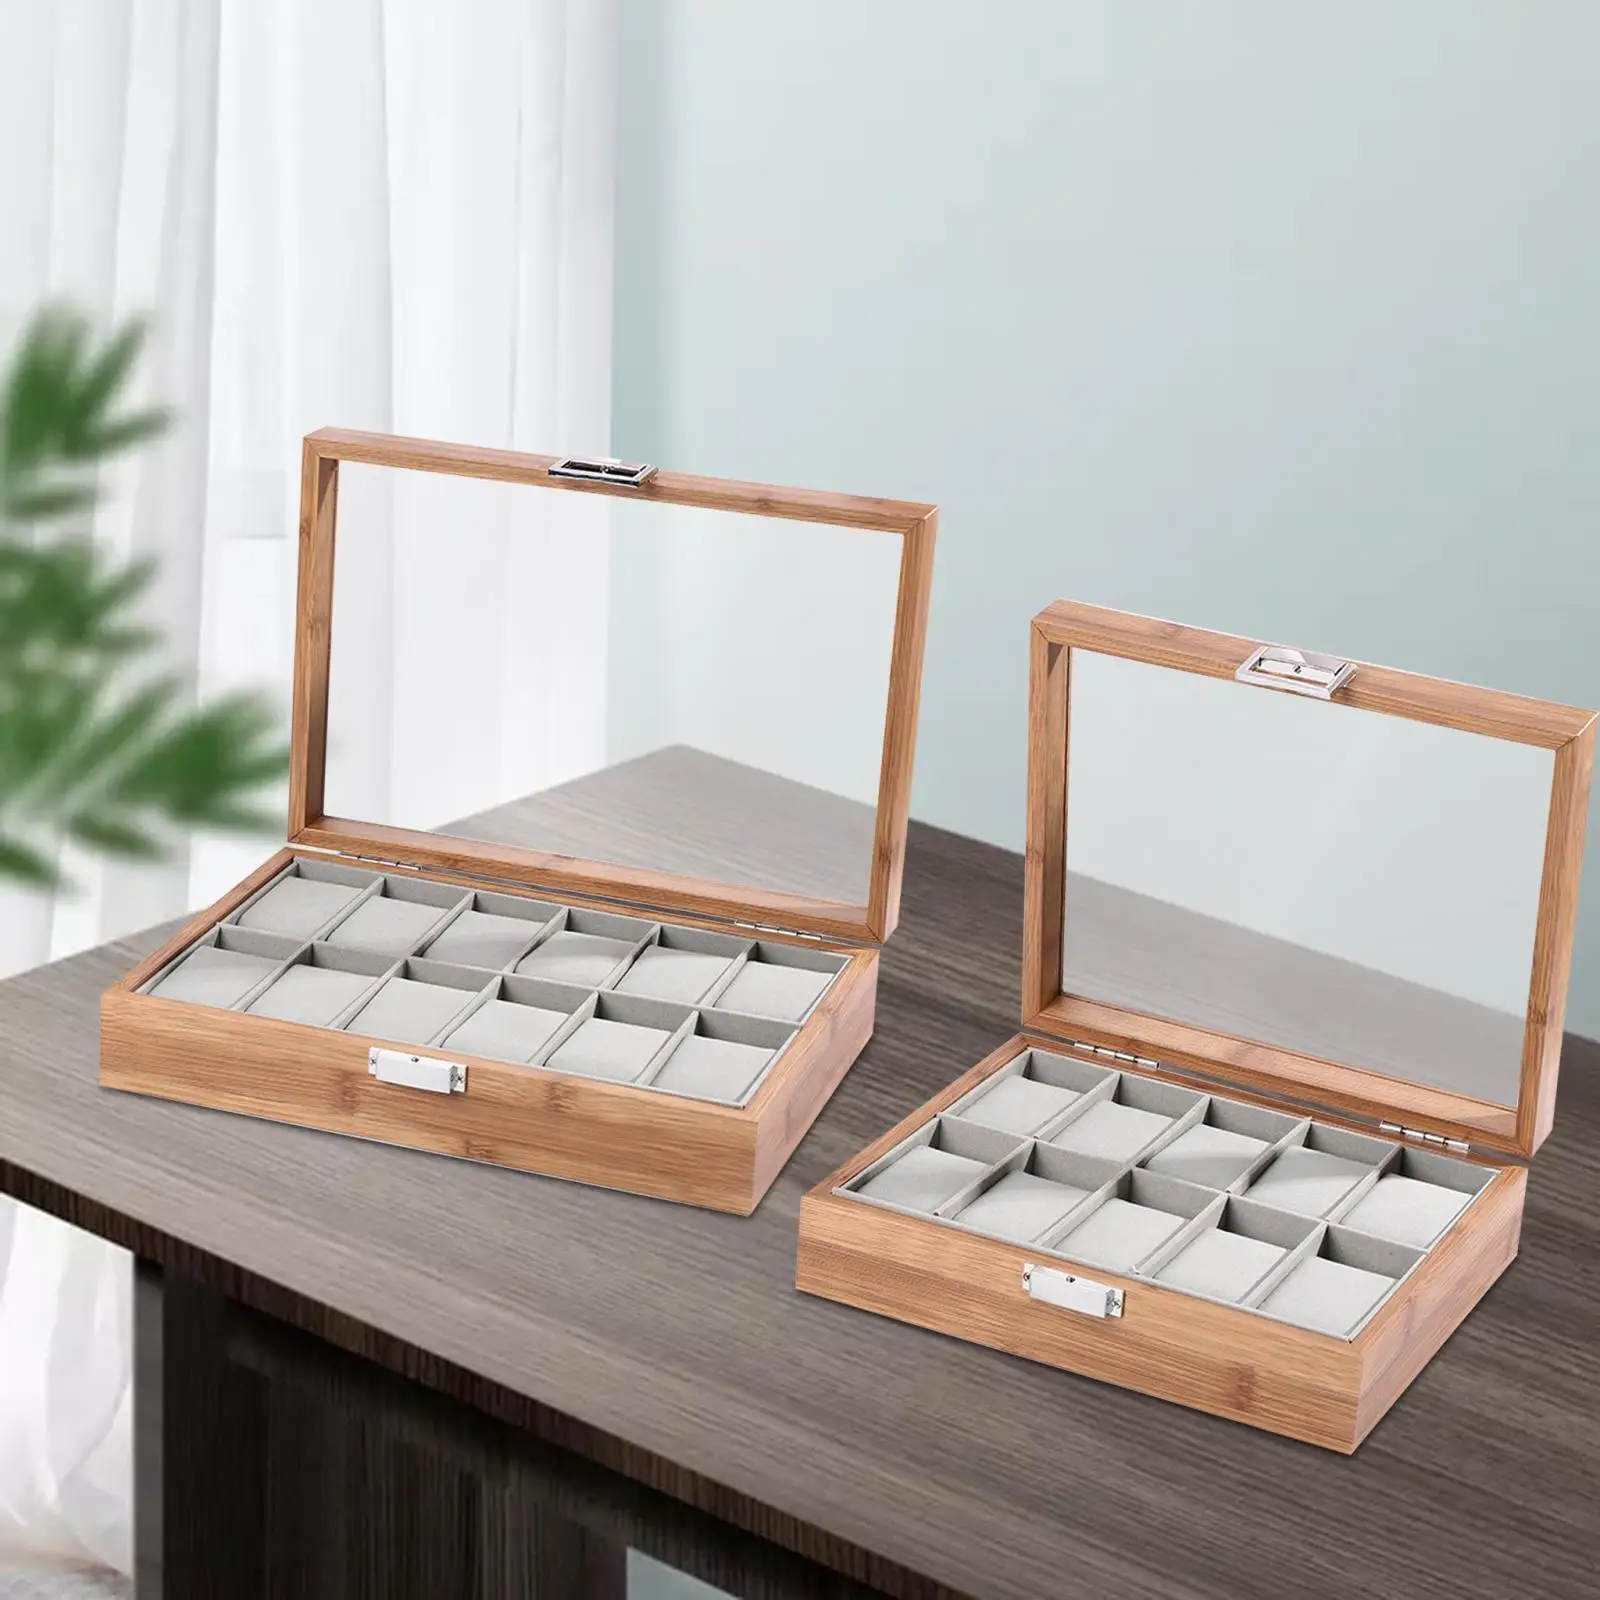 Watch Box Organizer Multifunctional Container Jewelry Display Case for Men Women Watches Jewelry Display Home Decoration